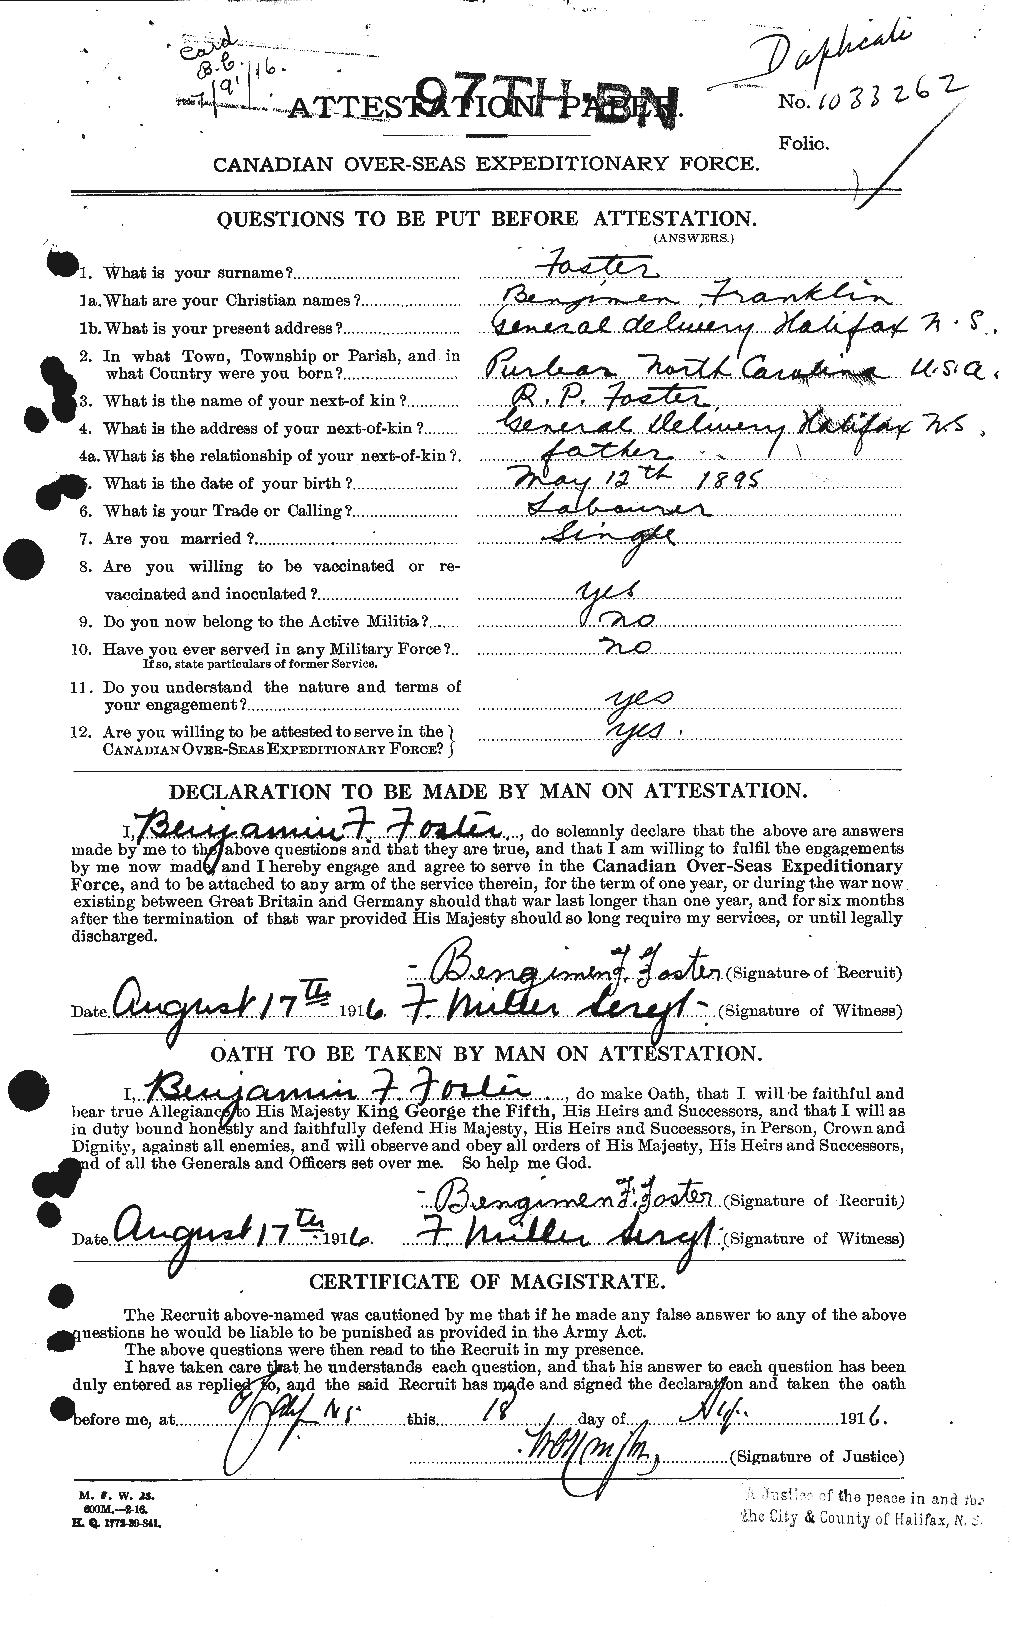 Personnel Records of the First World War - CEF 330484a